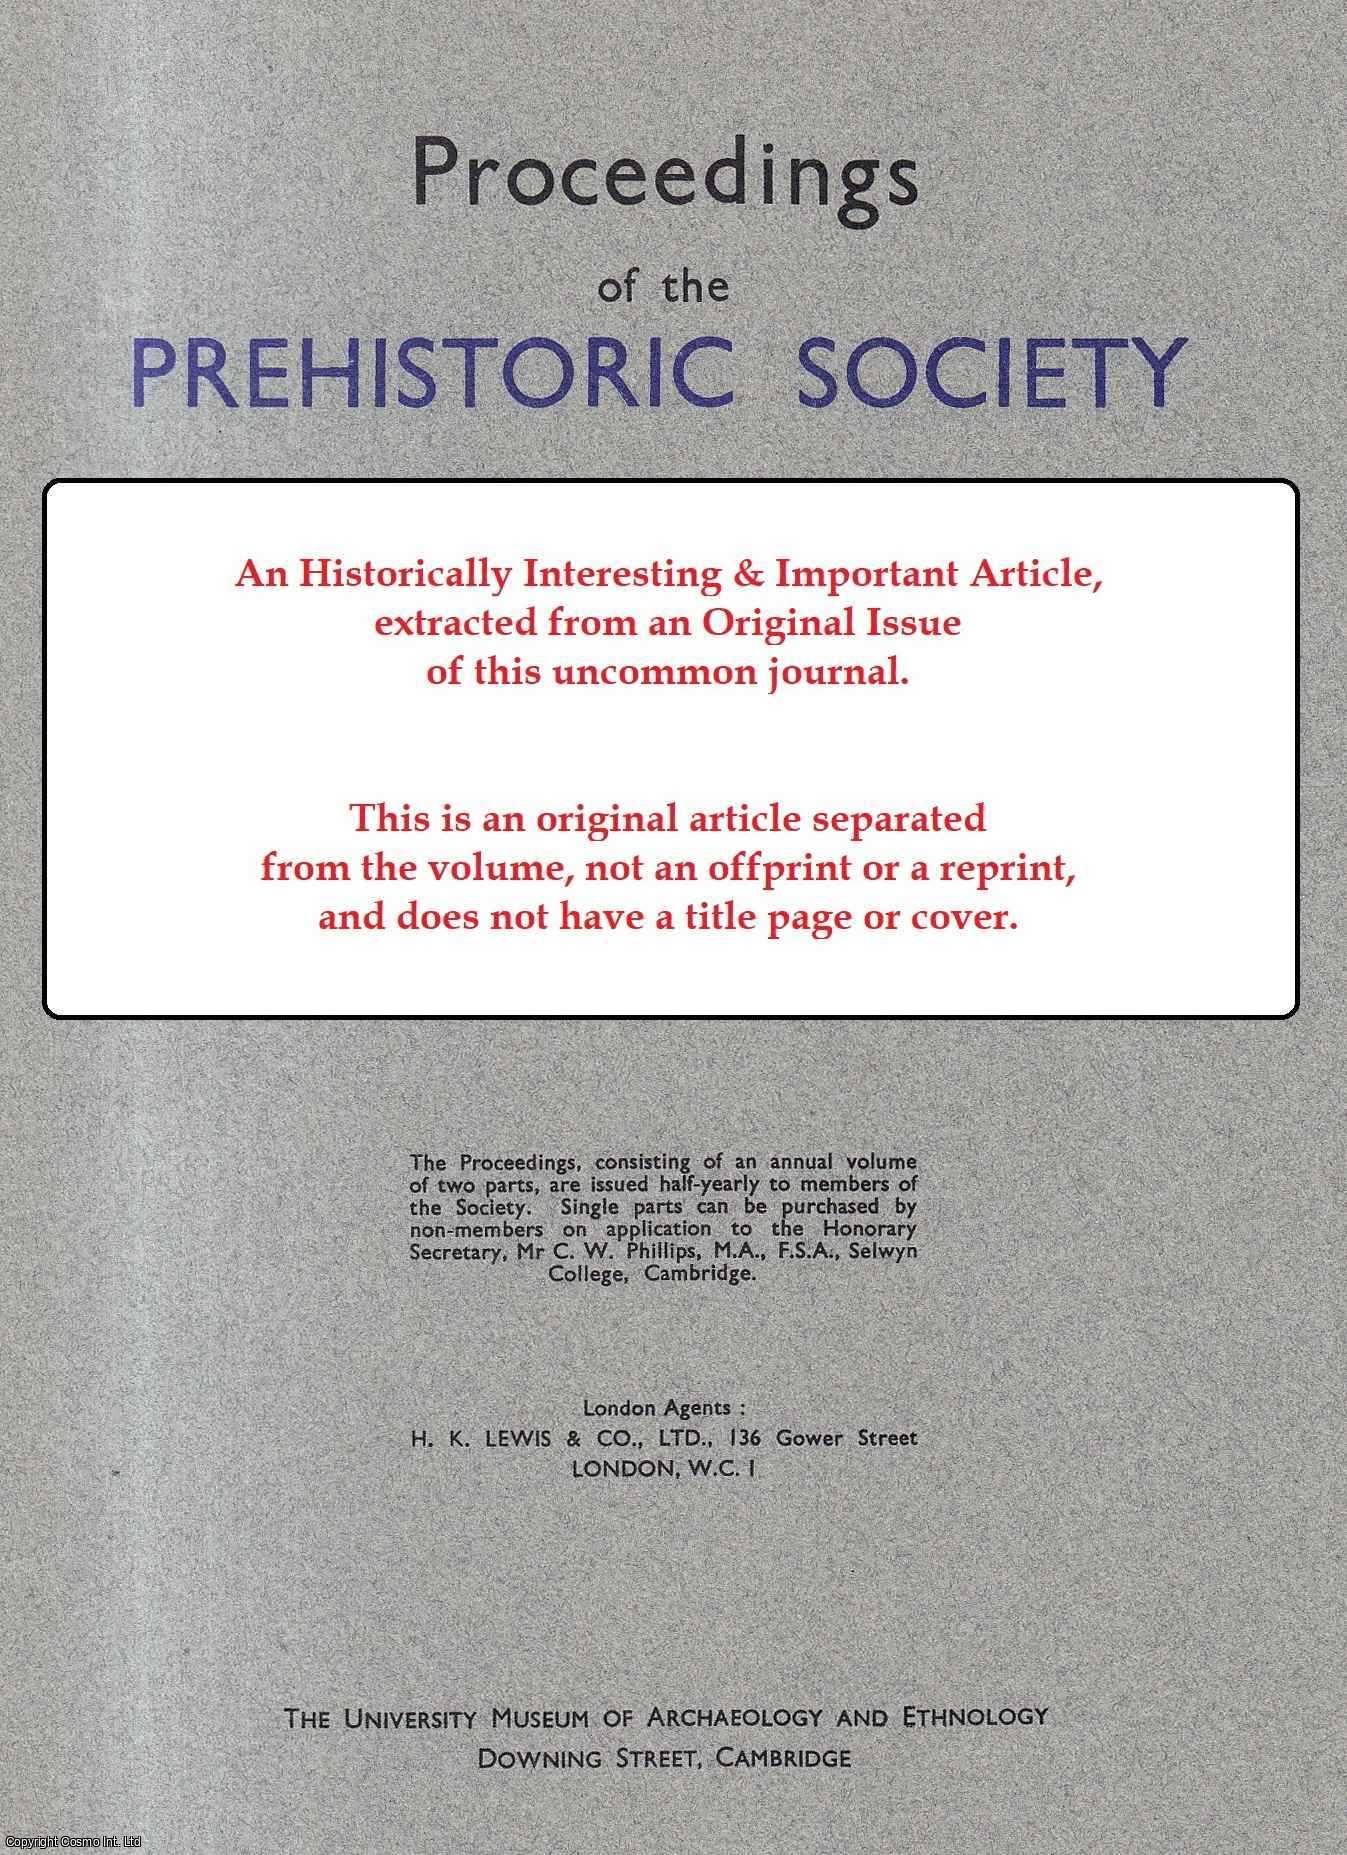 P. F. Stary - Foreign Elements in Etruscan Arms and Armour: 8th to 3rd Centuries B.C. An original article from Proceedings of the Prehistoric Society, 1979.